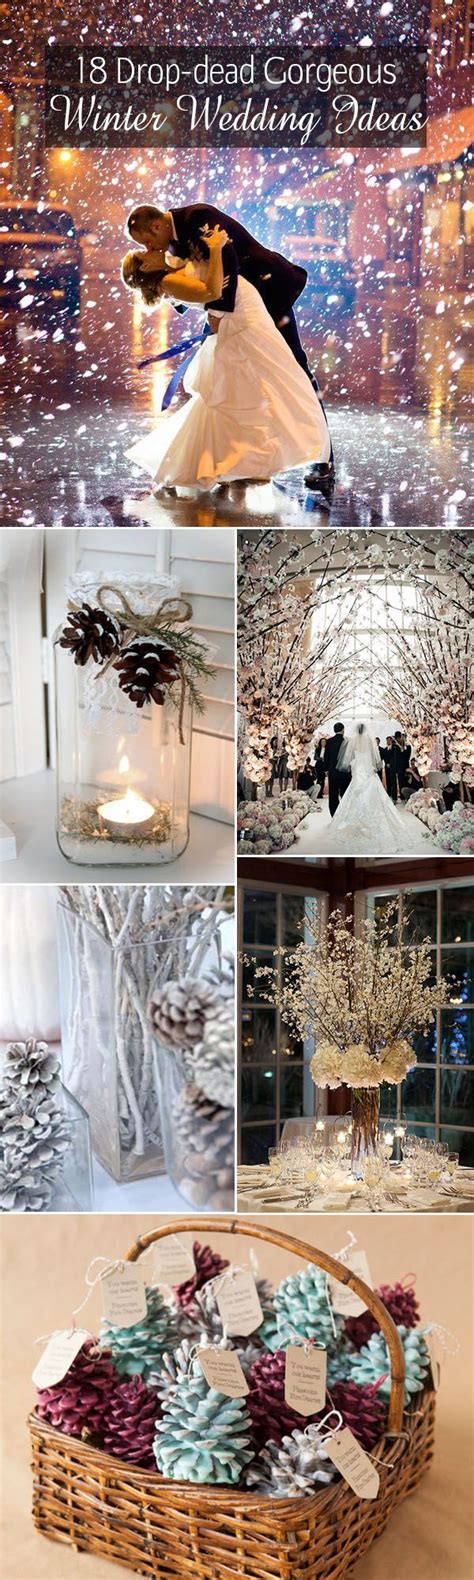 18 Winter Wedding Themes Pictures Photos And Images For Facebook